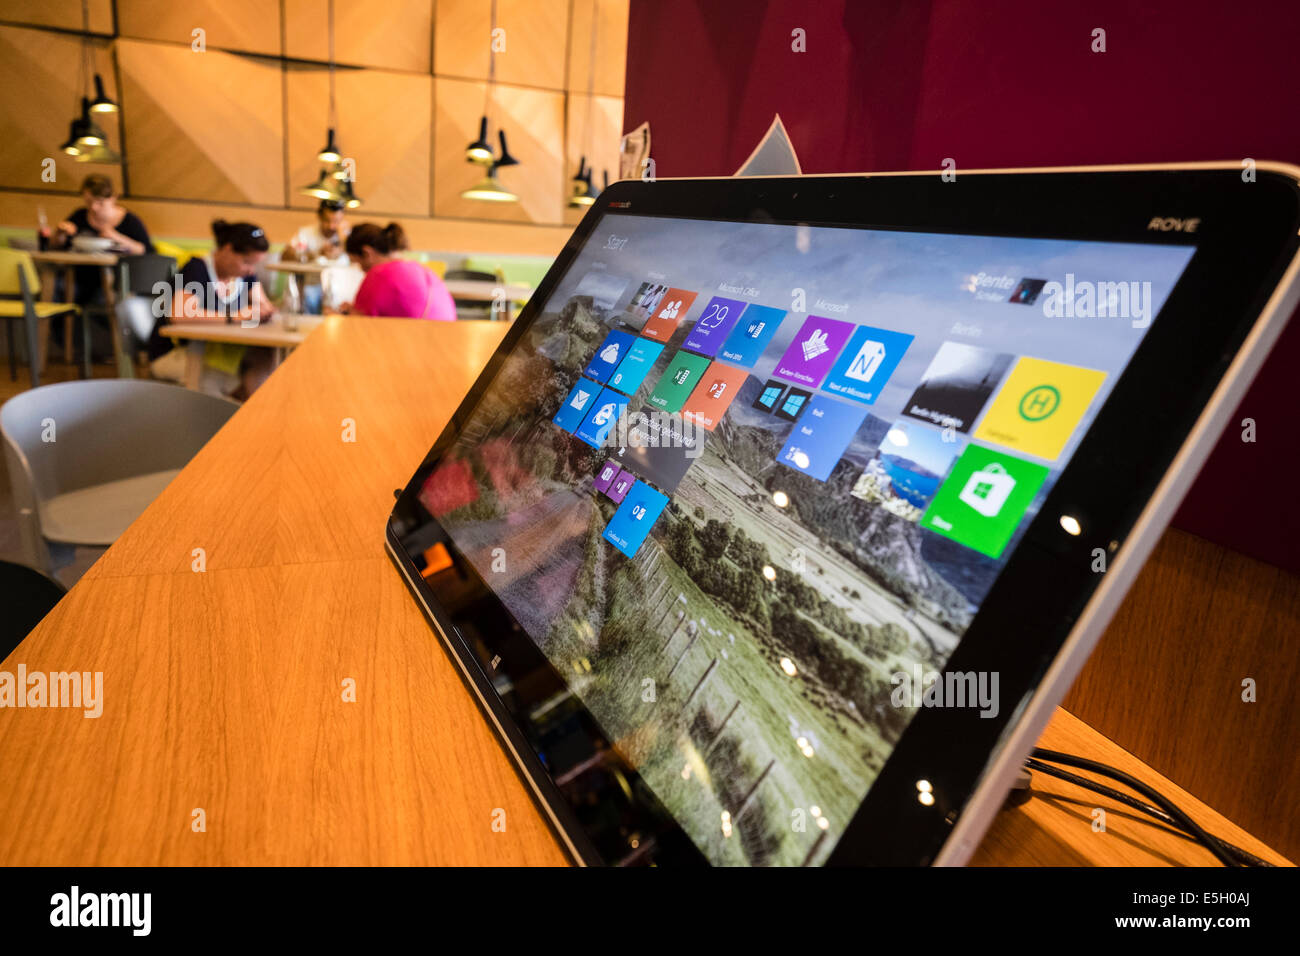 large touchscreen computer for customers at new Microsoft Digital Eatery cafe on Unter den Linden in Berlin Germany Stock Photo